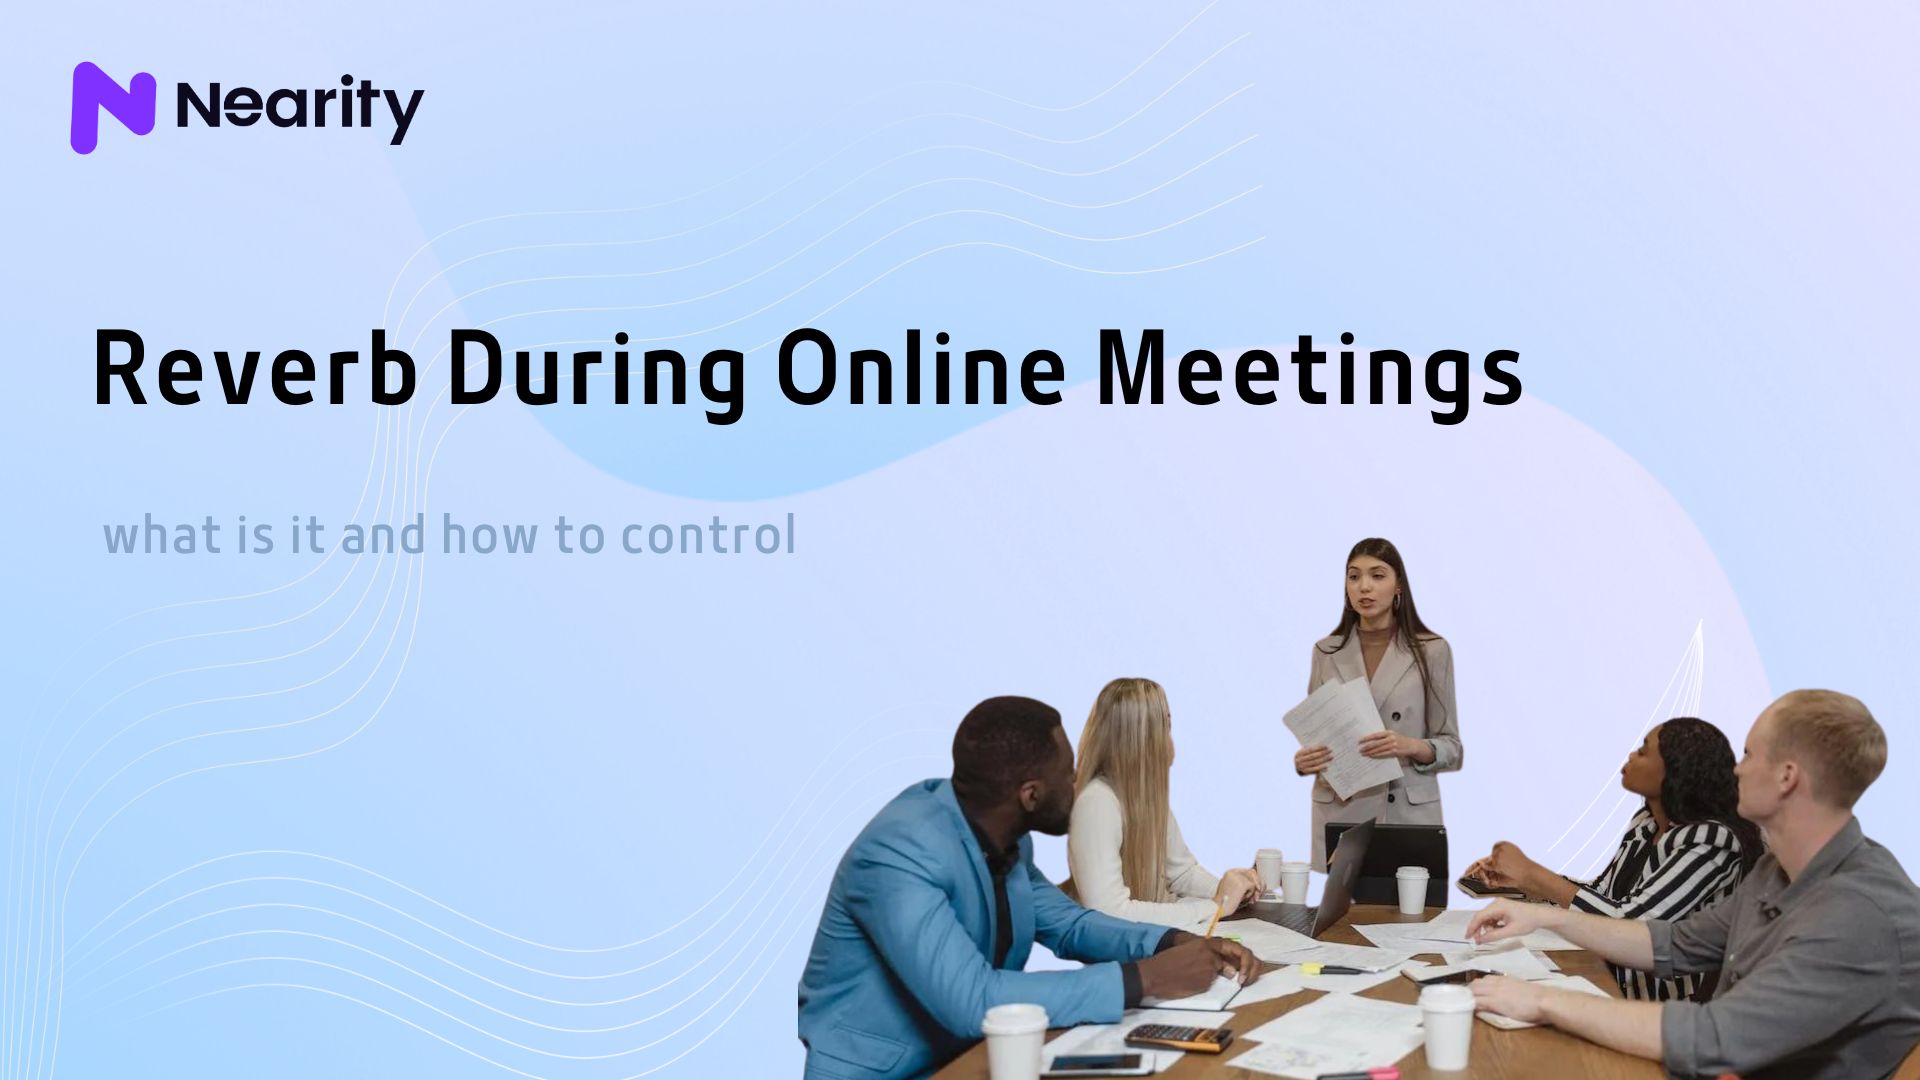 Understanding and Controlling Reverb During Online Meetings